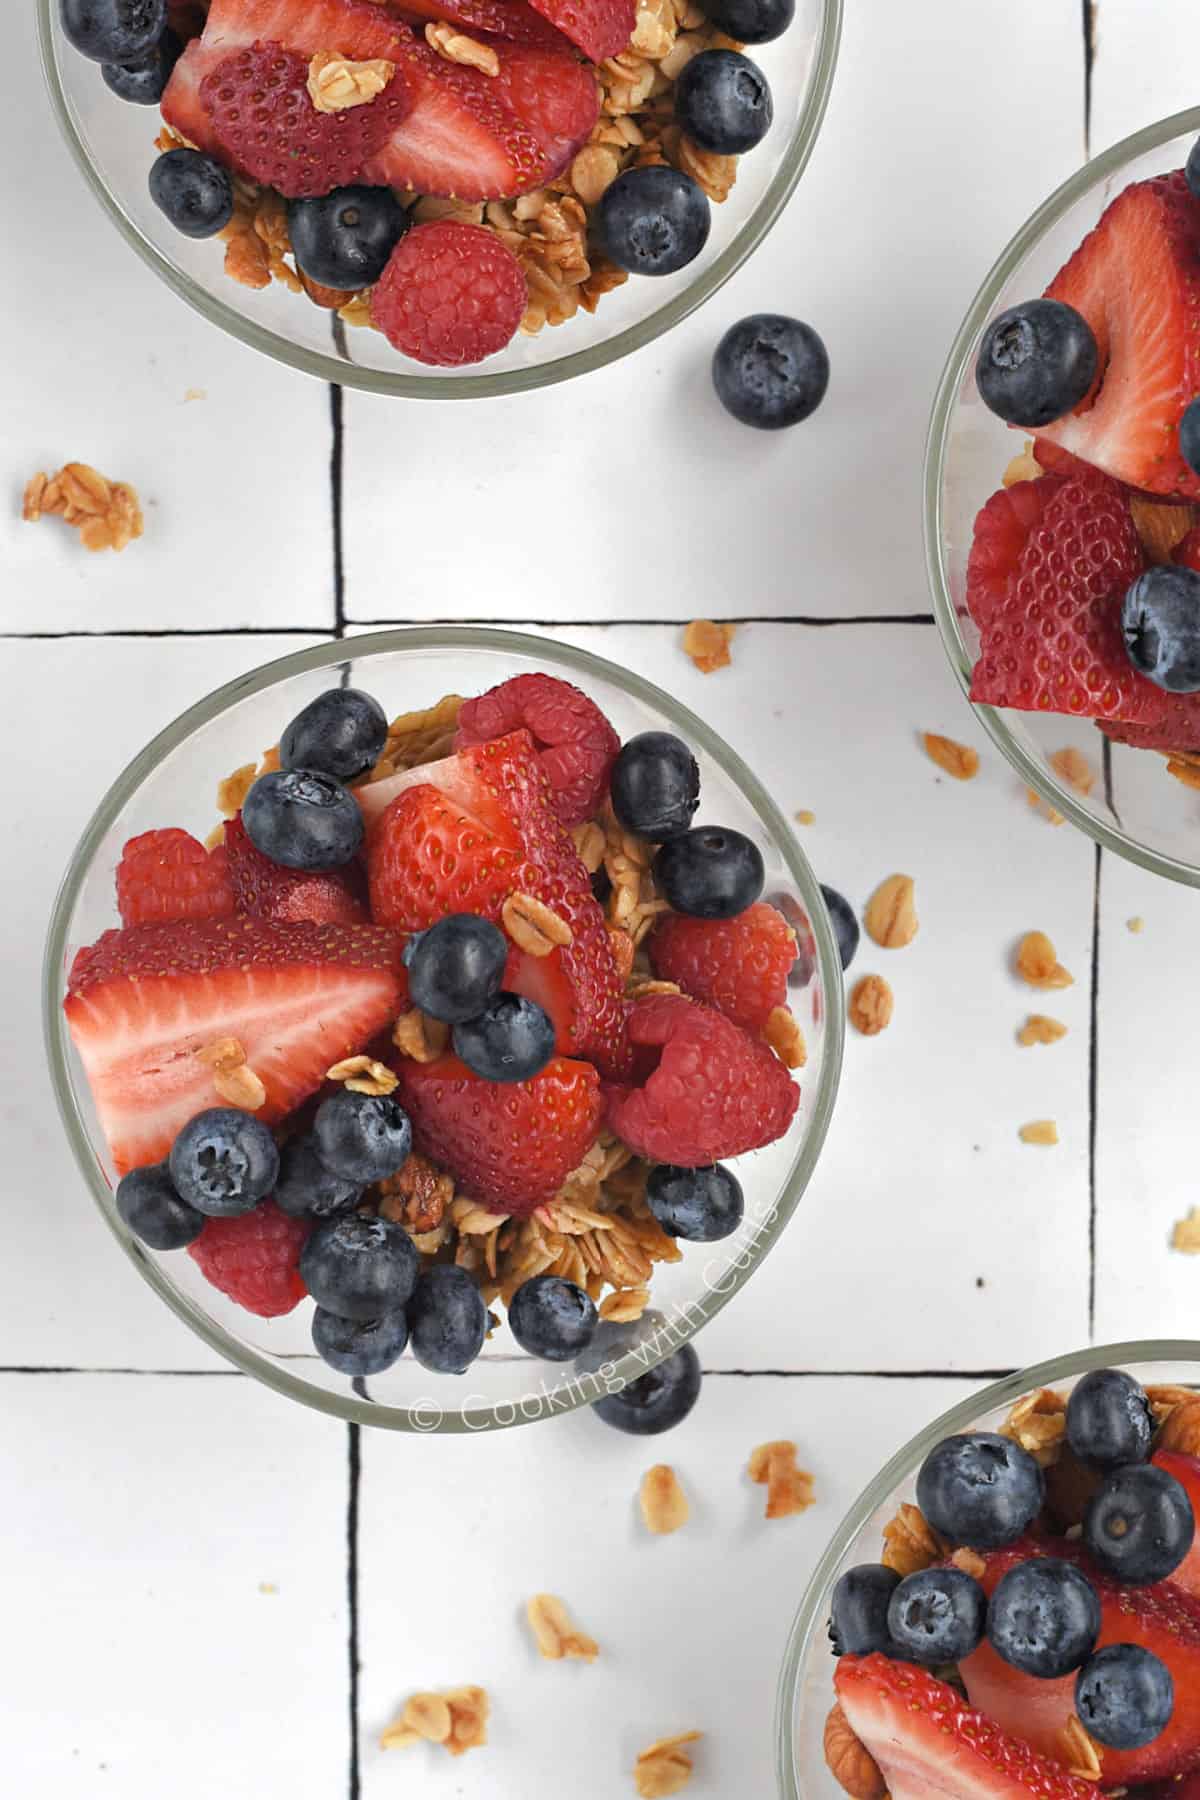 Looking down on four small glass bowls filled with yogurt, granola, blueberries, raspberries and sliced strawberries.